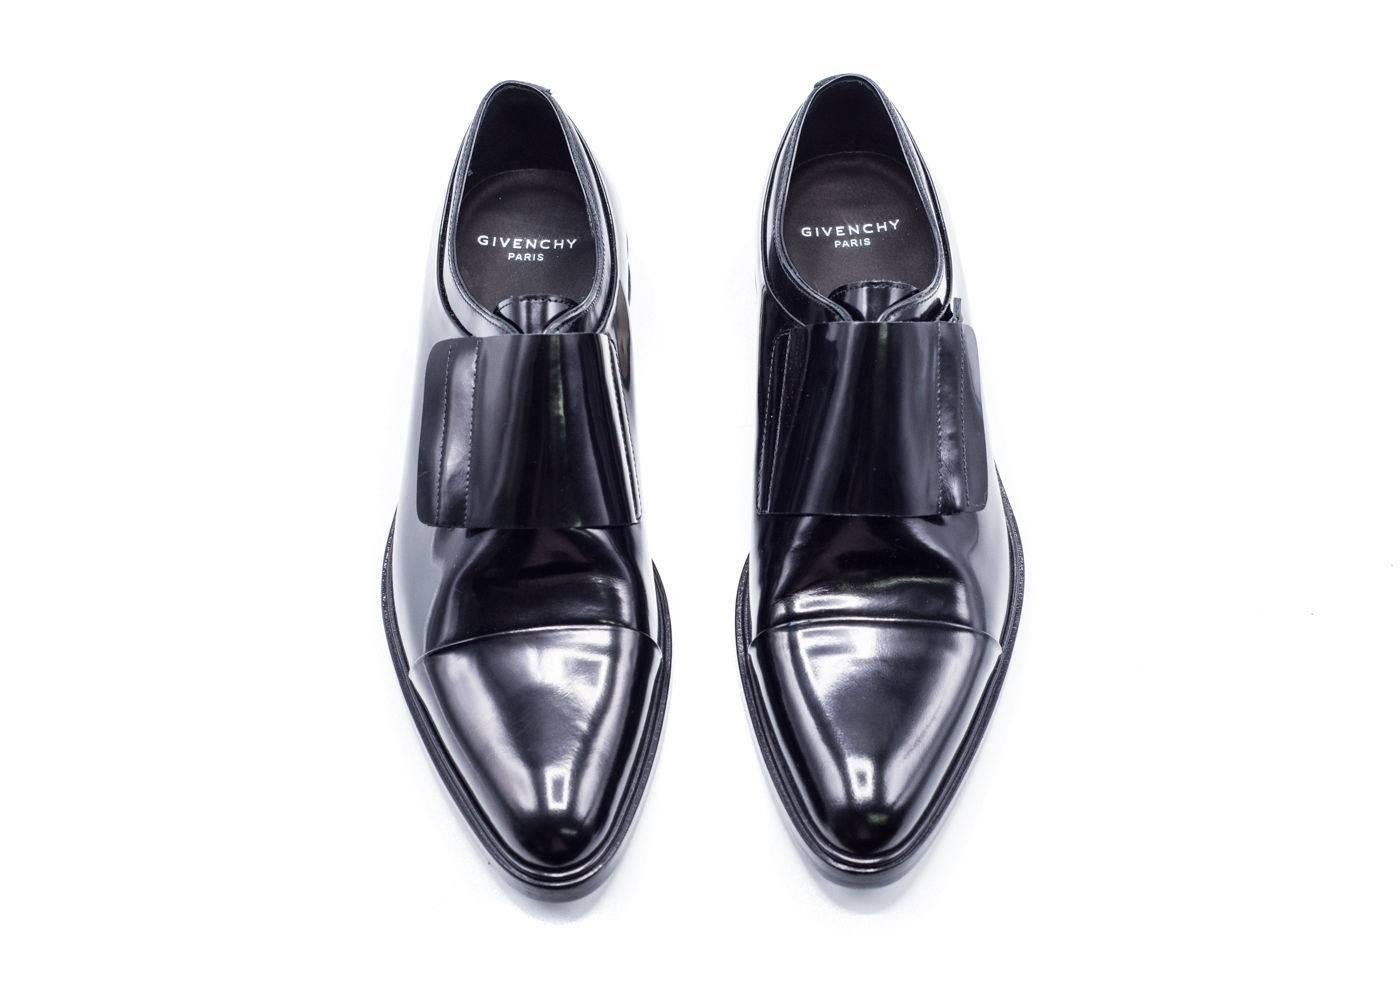 Classic black oxford silhouette from fashion house Givenchy to up your dressy wardrobe. Pair with any dress bottoms and dress shirt for that classic look. Monk Style Strap over With a Hidden Zipper to make this Shoe a classic. Metal Stripe on Heel